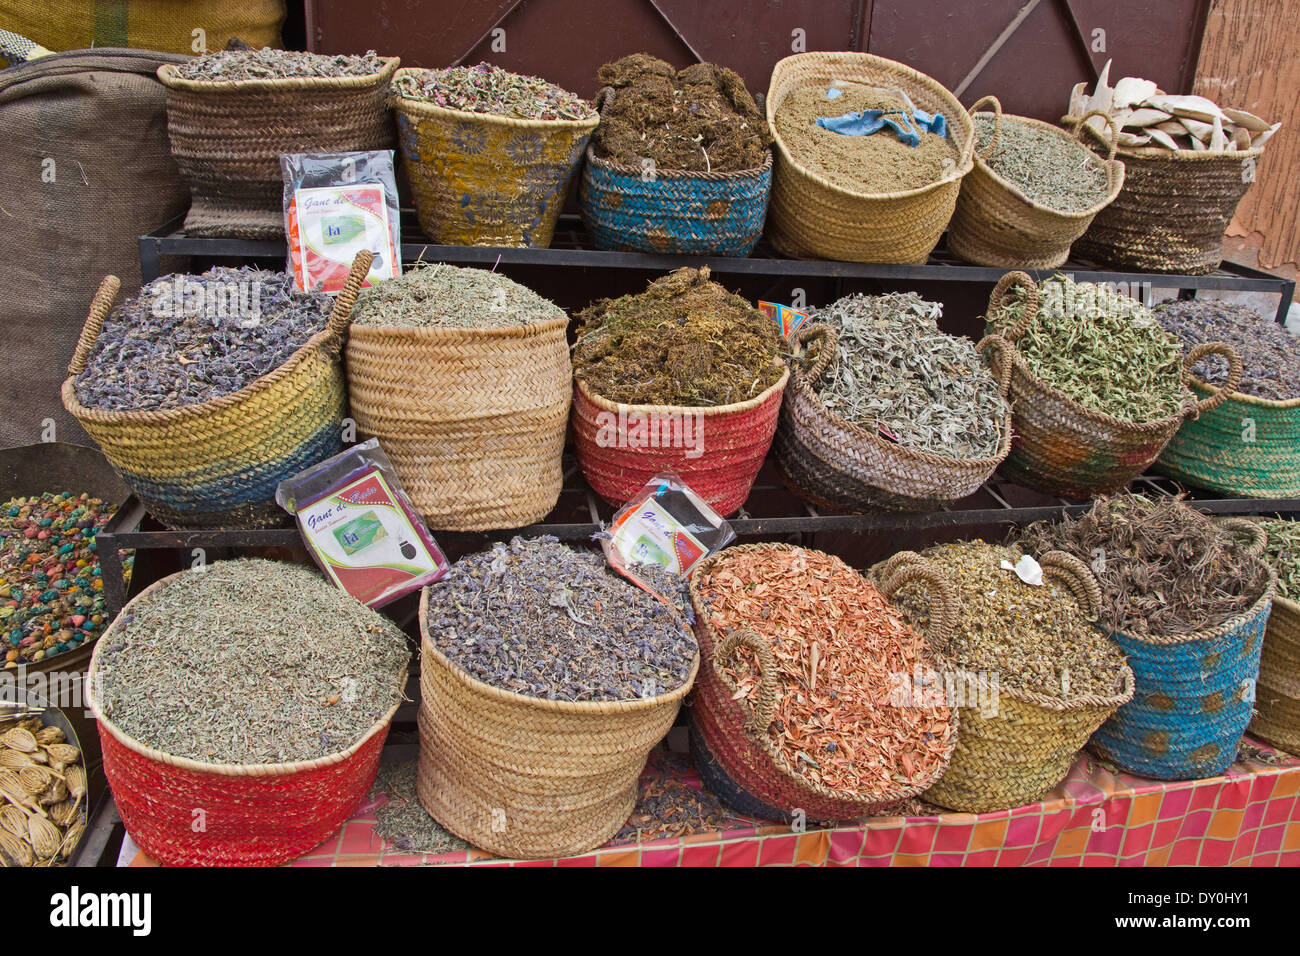 Herbs and spices on sale in souks in Marrakech, Morocco Stock Photo